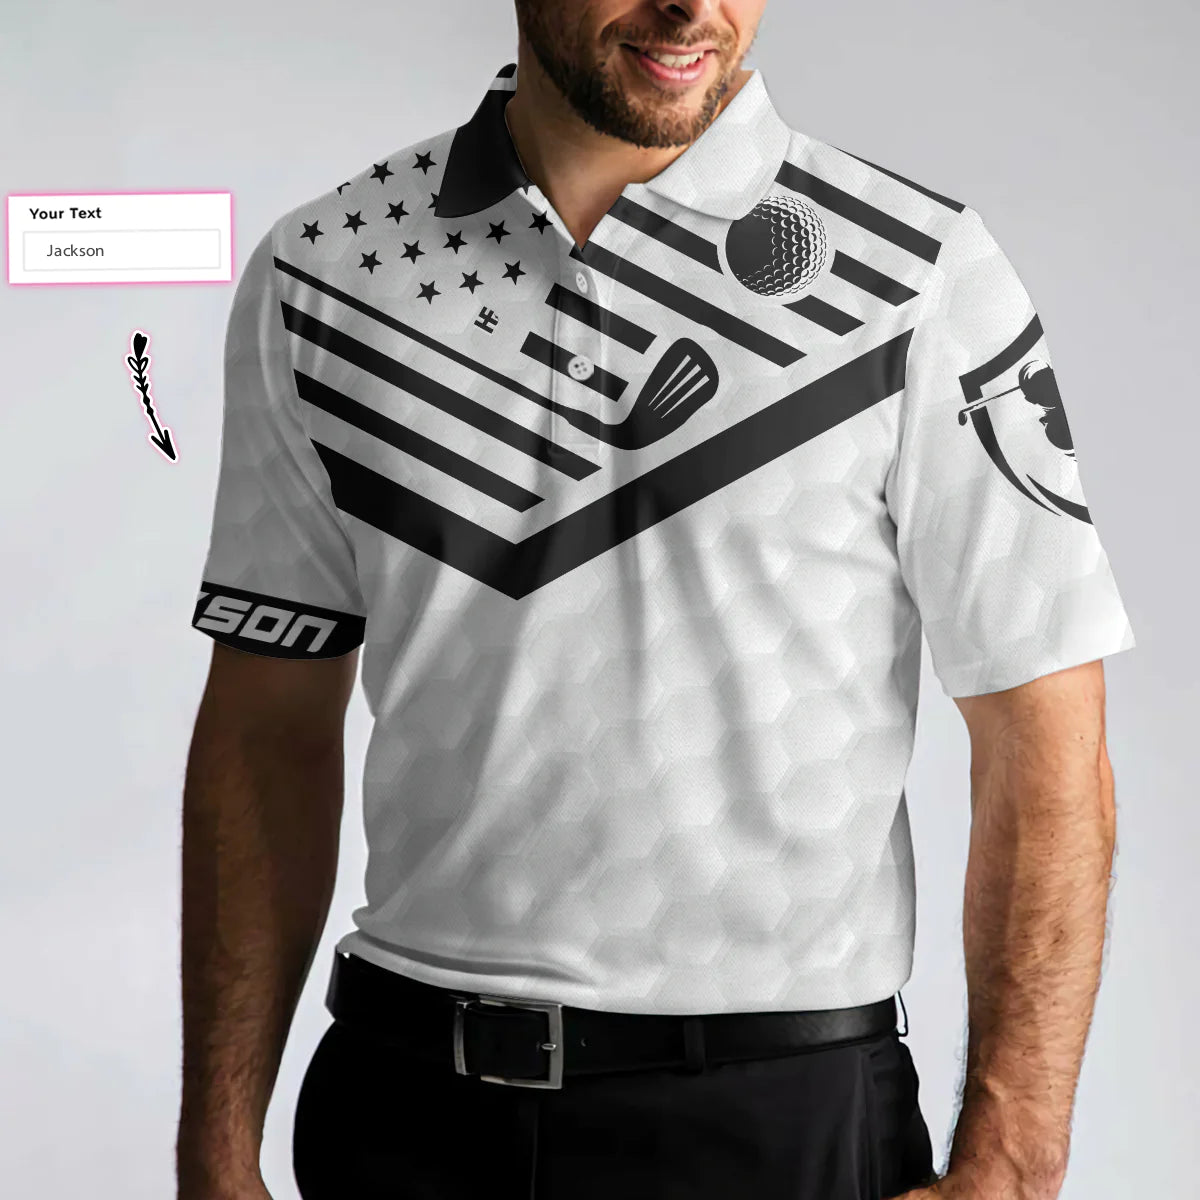 customized white american flag polo shirt perfect golf shirt for men with your hole is my goal design gp433 dbbf3